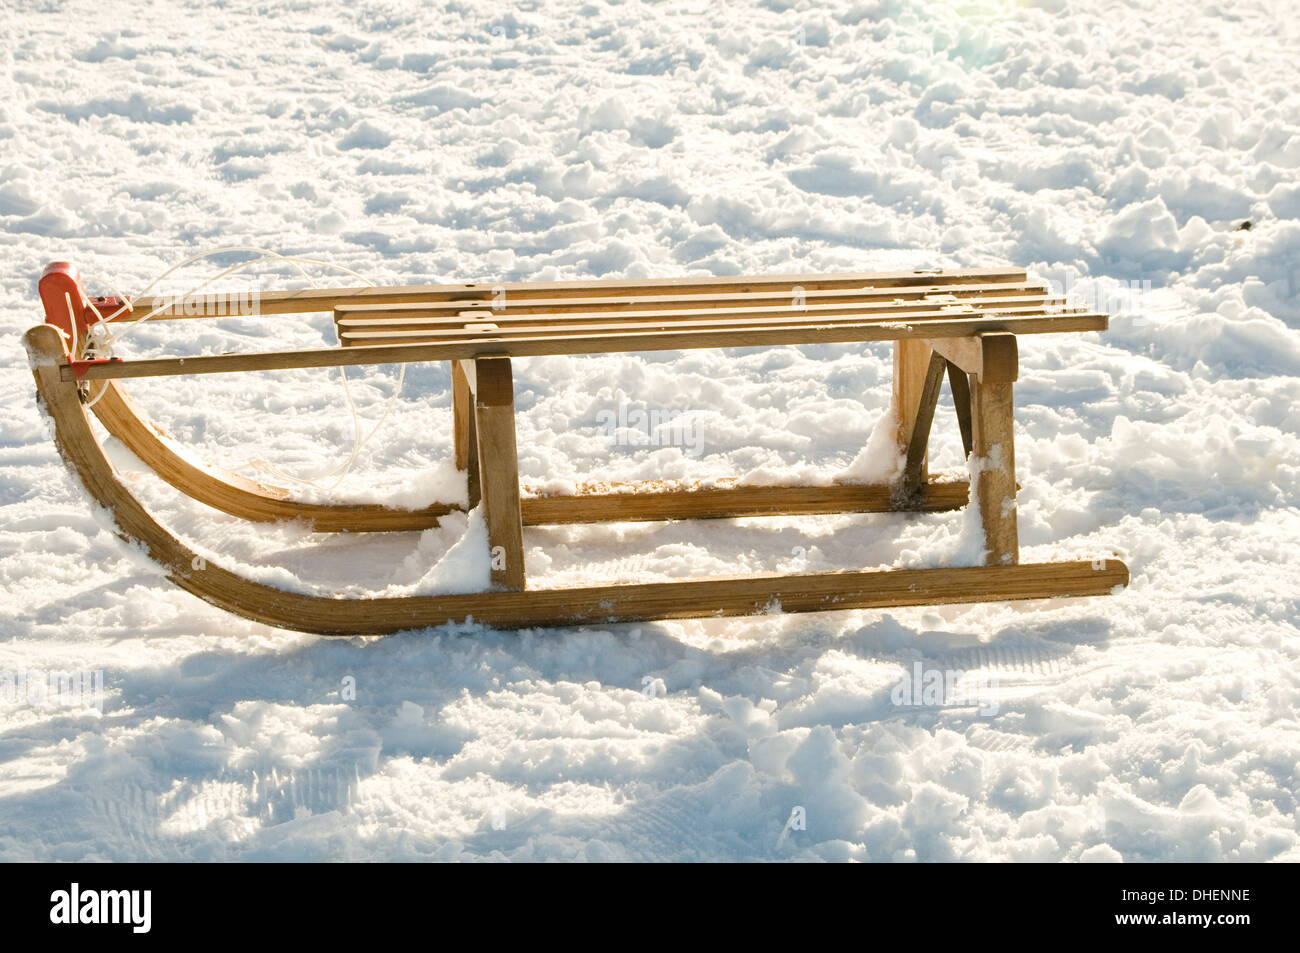 Wooden Toboggan High Resolution Stock Photography and Images - Alamy